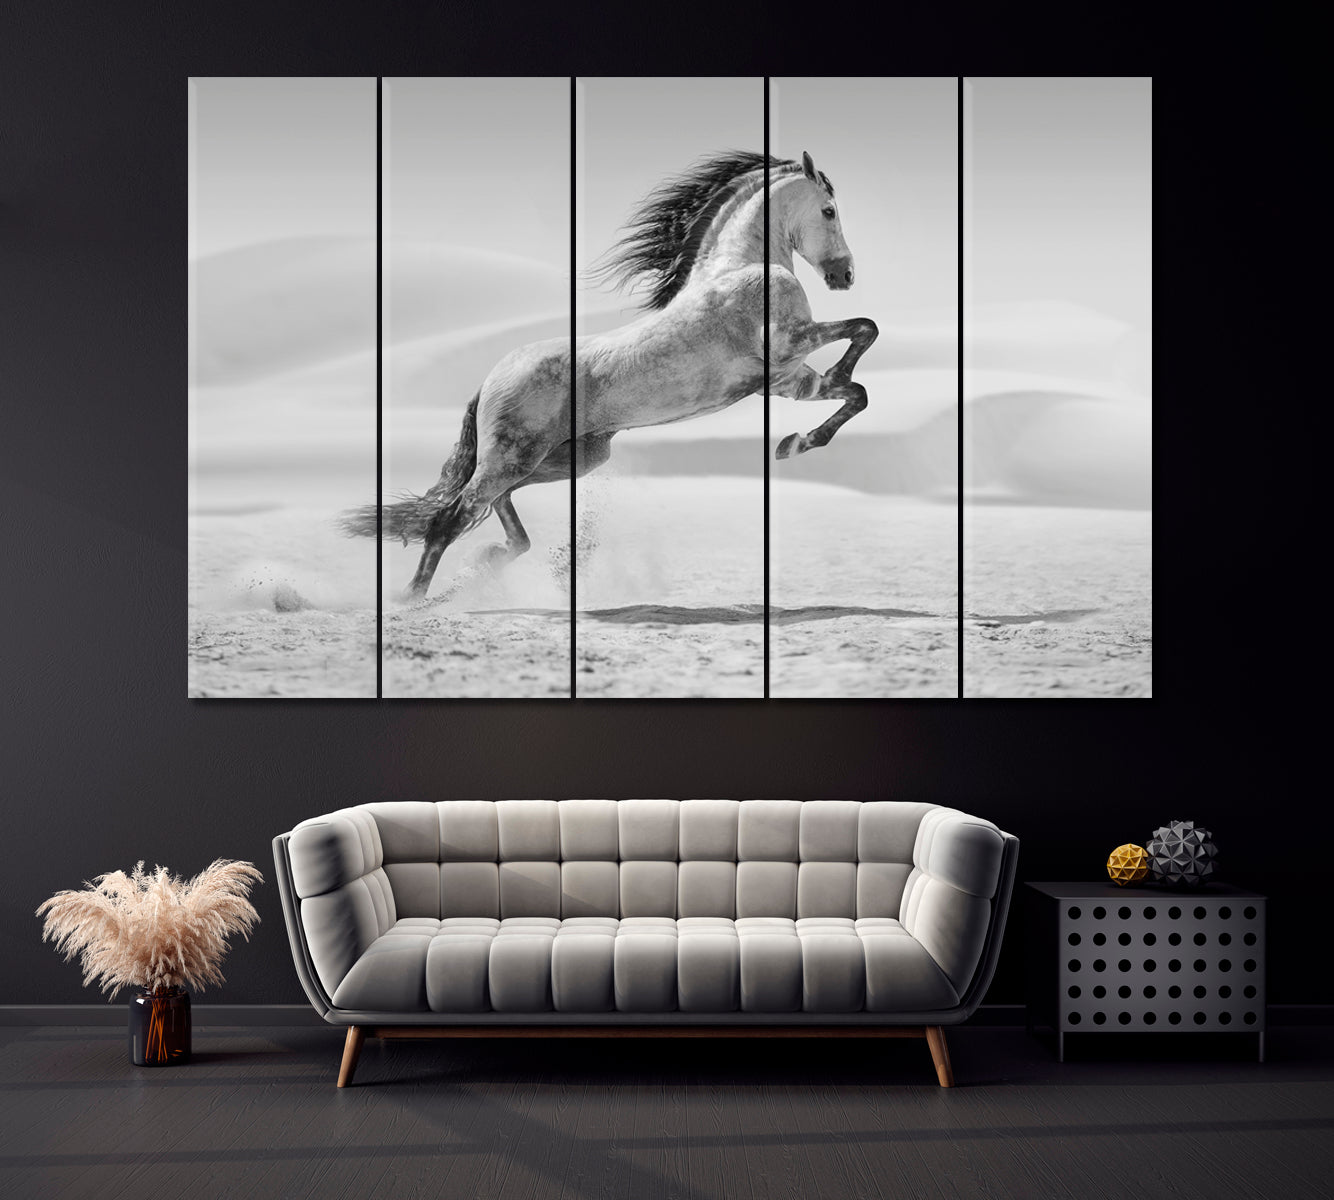 Horse in Desert in Black and White Canvas Print ArtLexy 5 Panels 36"x24" inches 